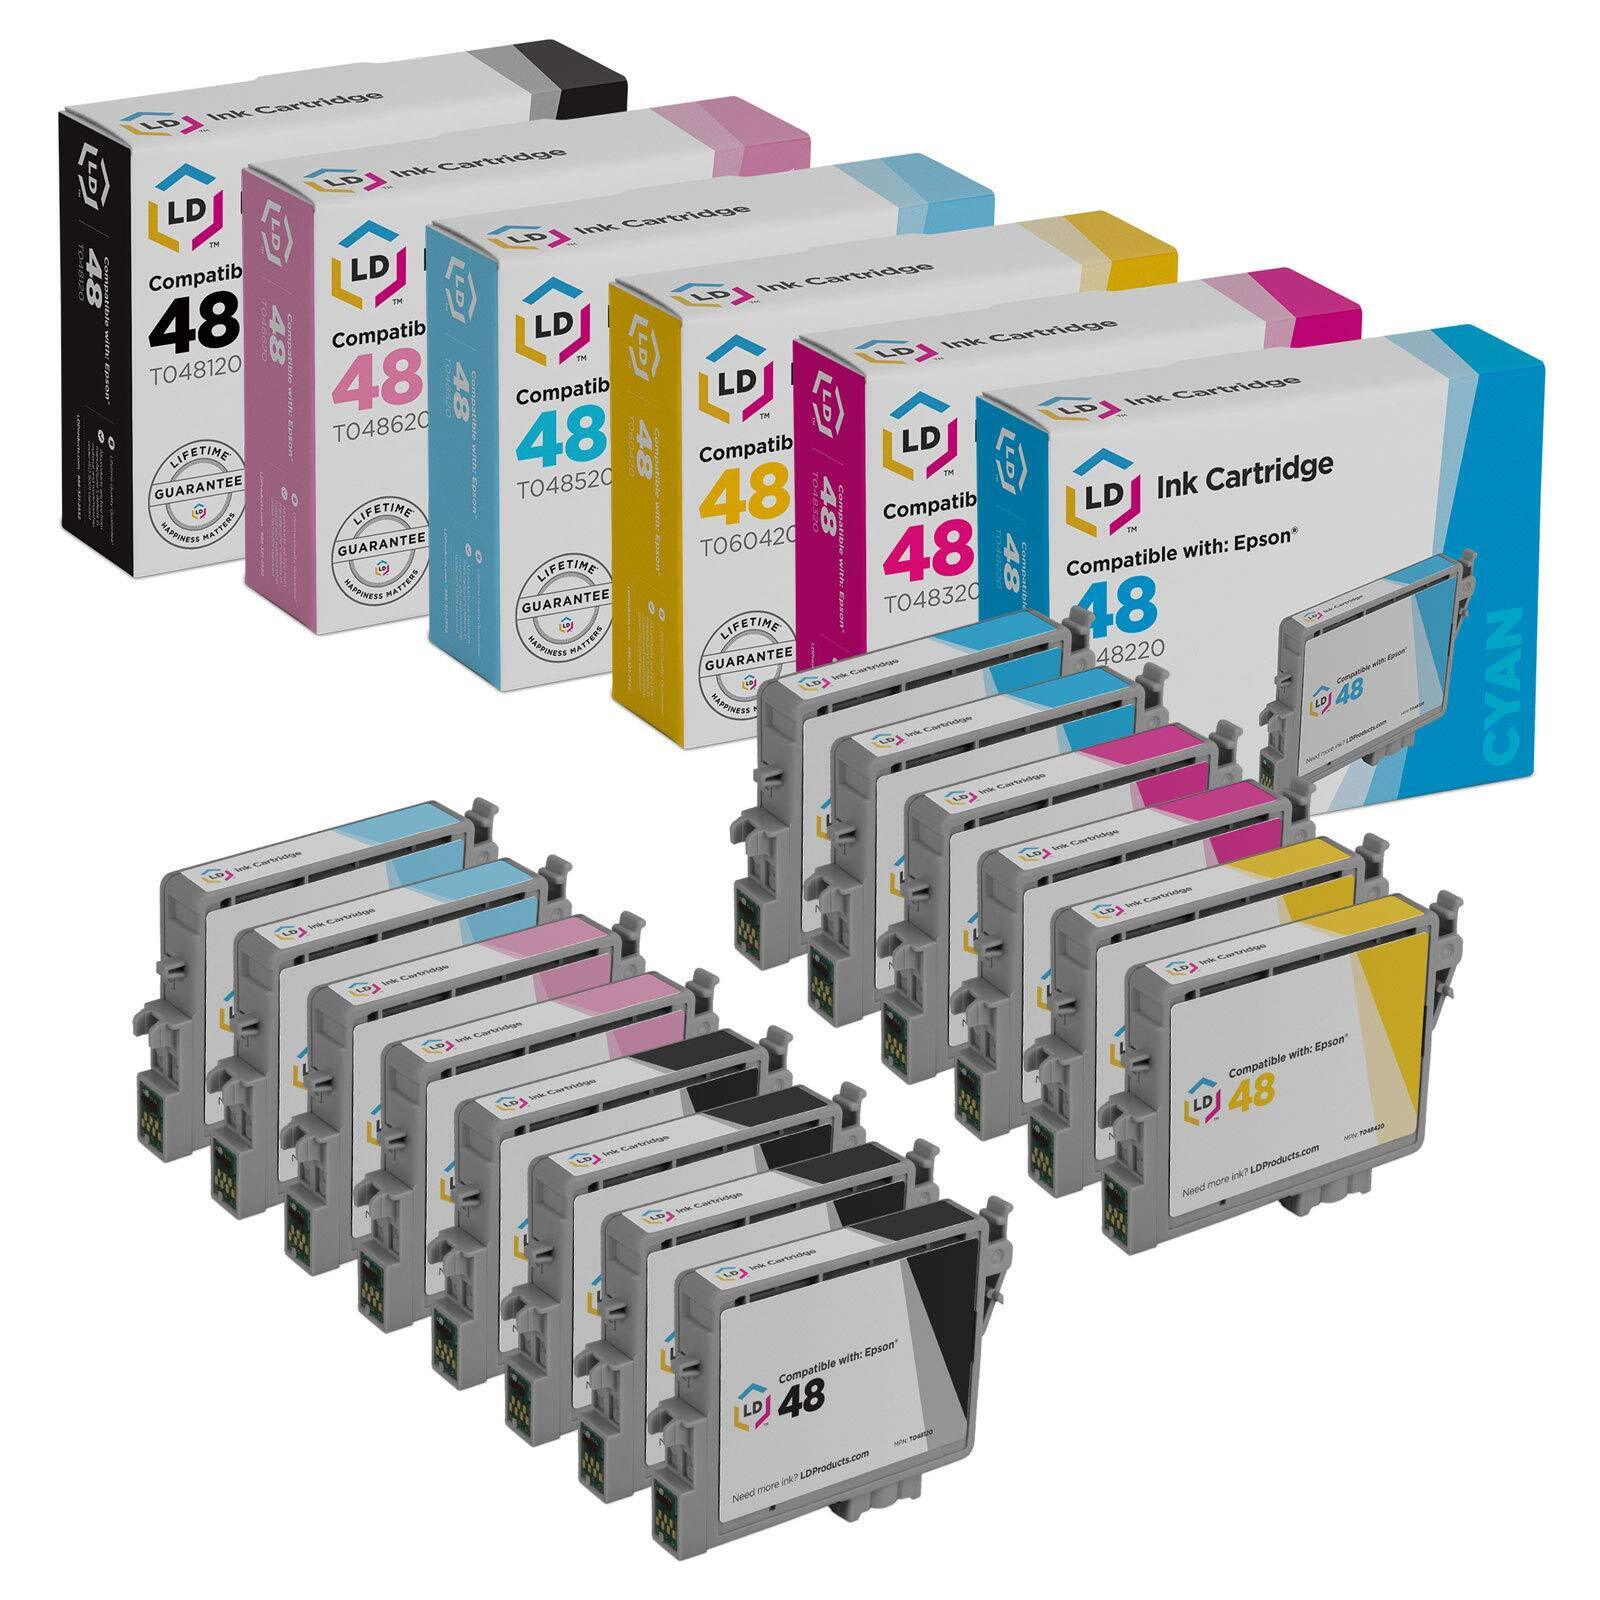 LD Reman Ink Cartridge Replacements for Epson 48 (4 Black, 2 Cyan, 2